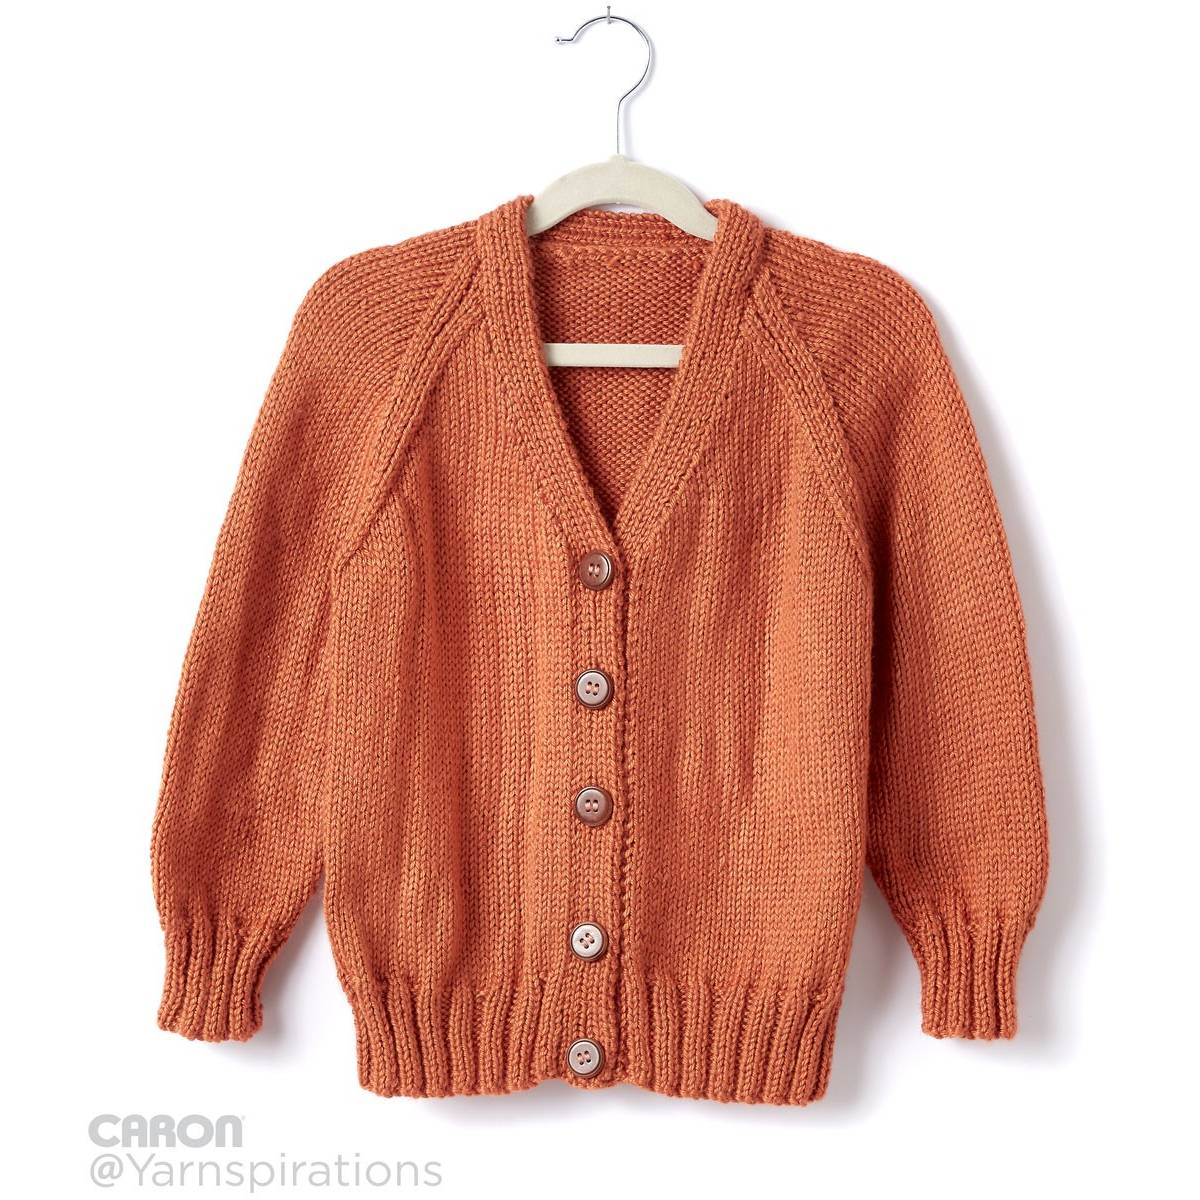 Knitted Childrens Sweaters Free Patterns Free Pattern Caron Childs Knit V Neck Cardigan Hobcraft